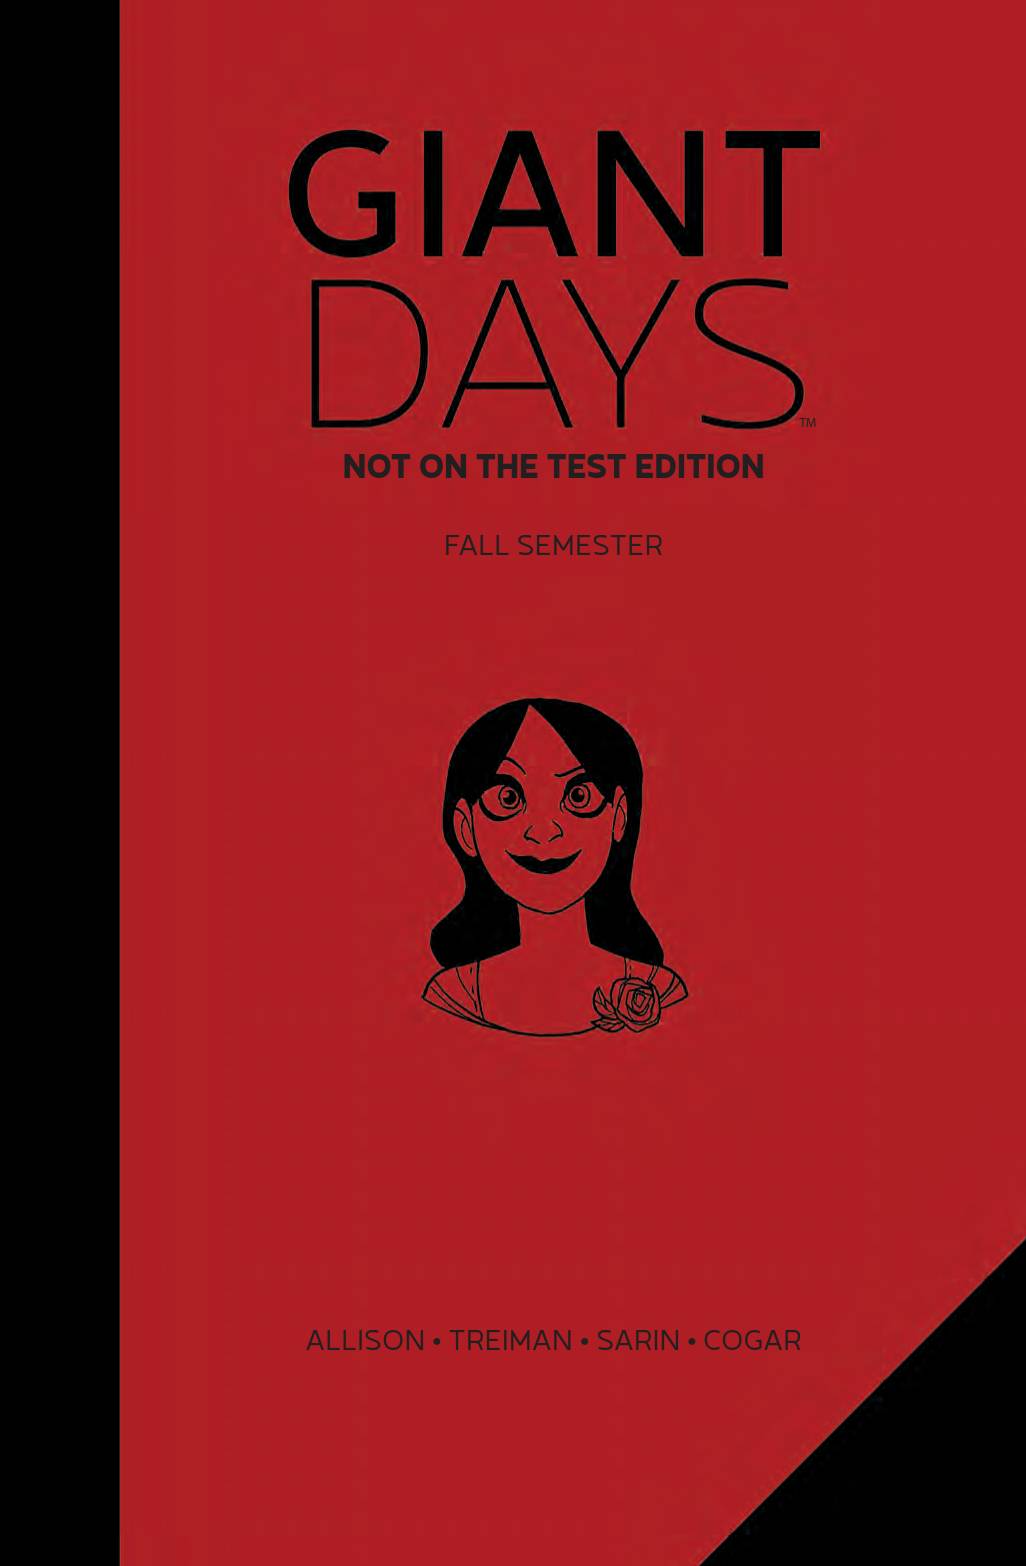 Giant Days Not on the Test Edition Hardcover Volume 1